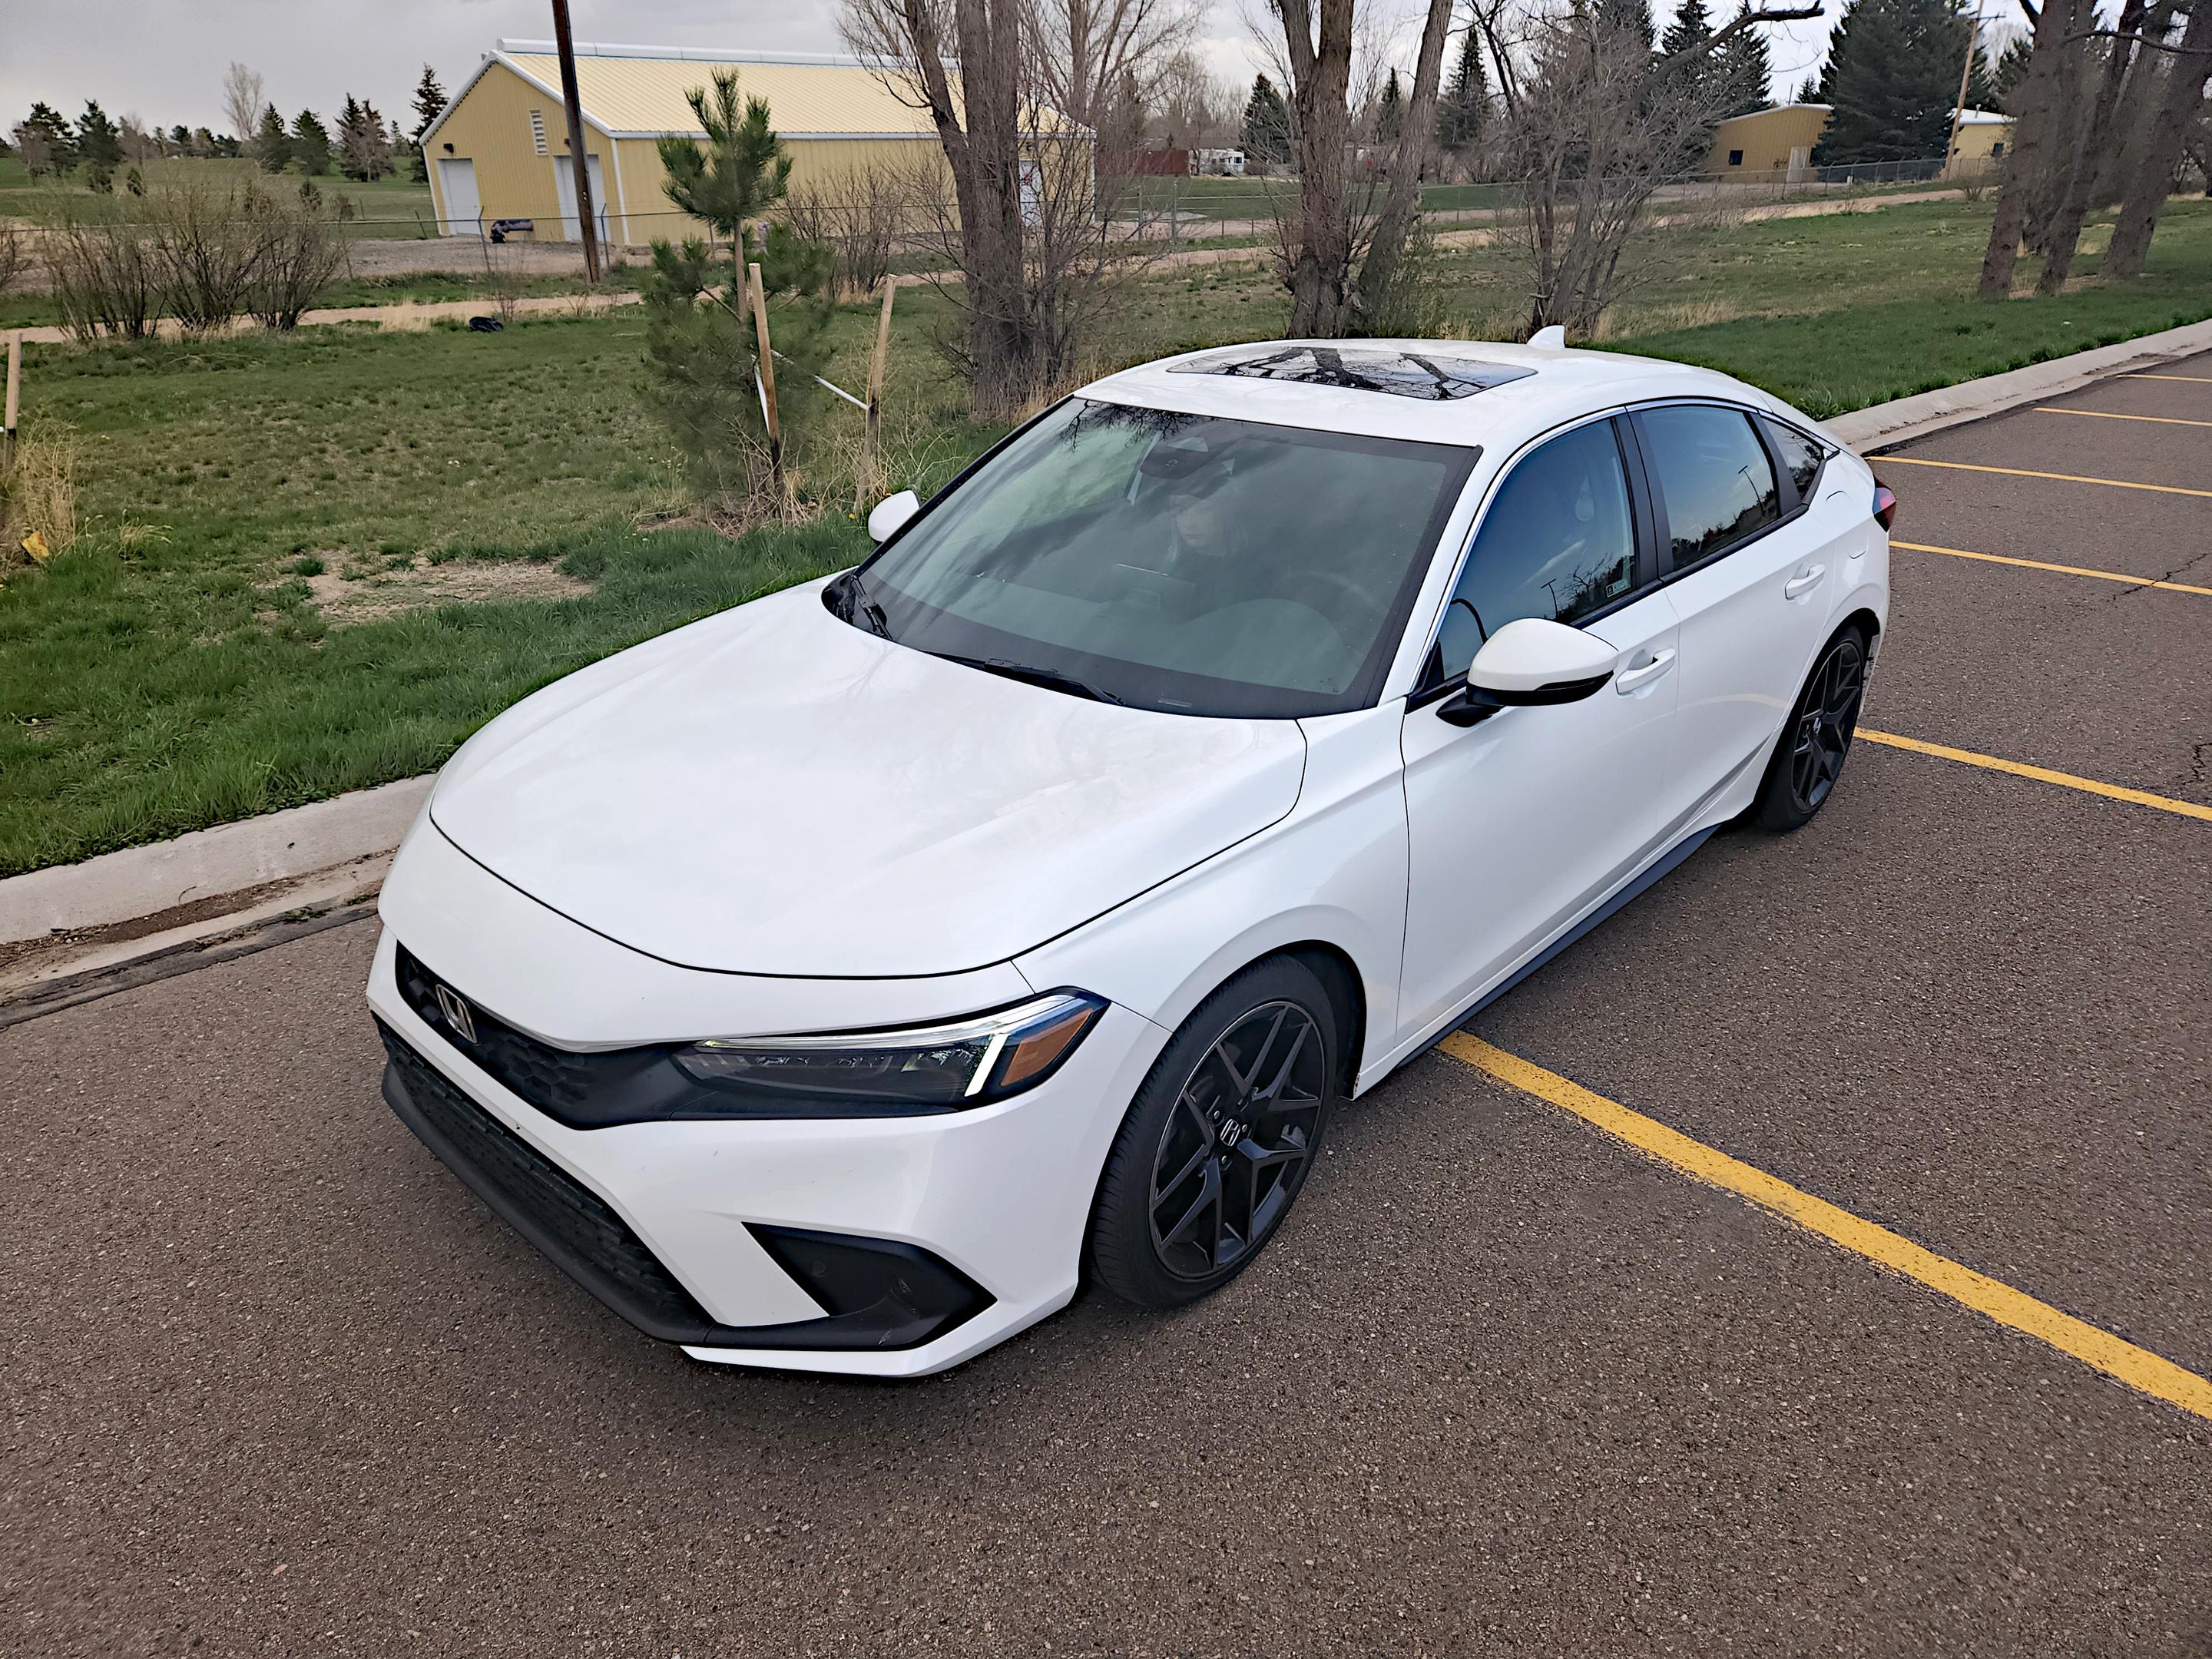 Review: 2022 Honda Civic Hatchback is the way to roll